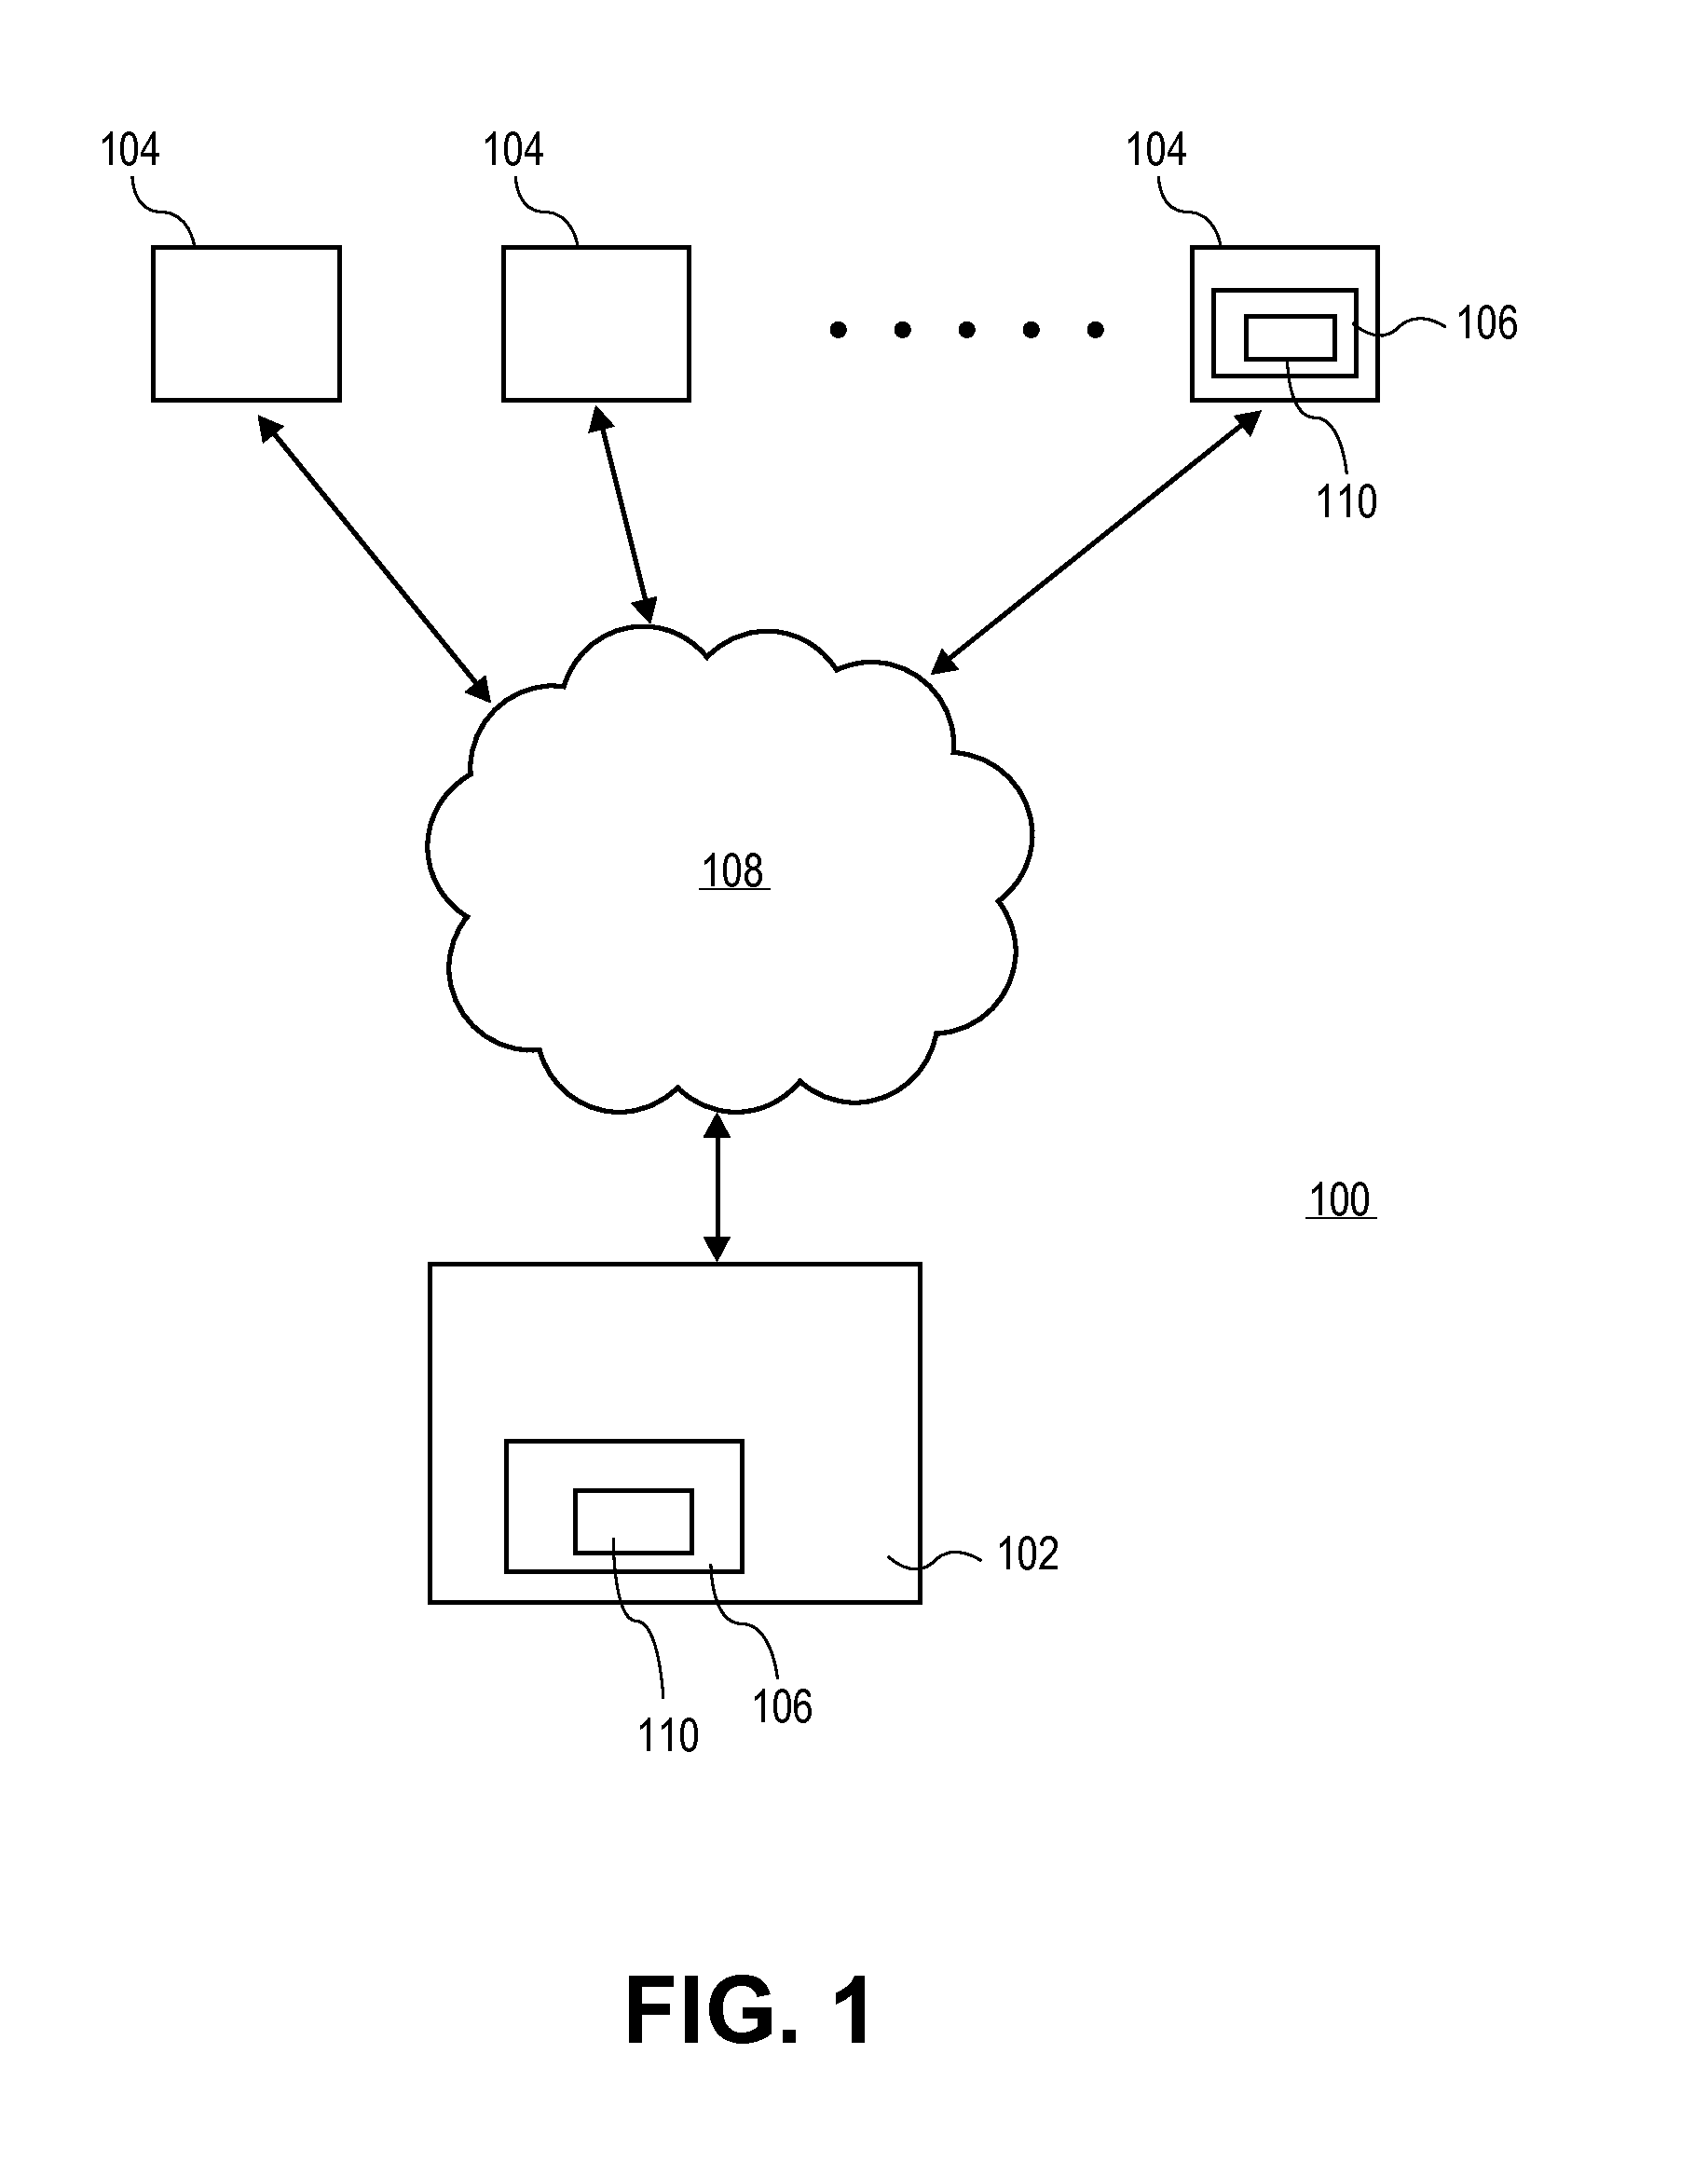 Systems and methods for providing multiple isolated execution environments for securely accessing untrusted content